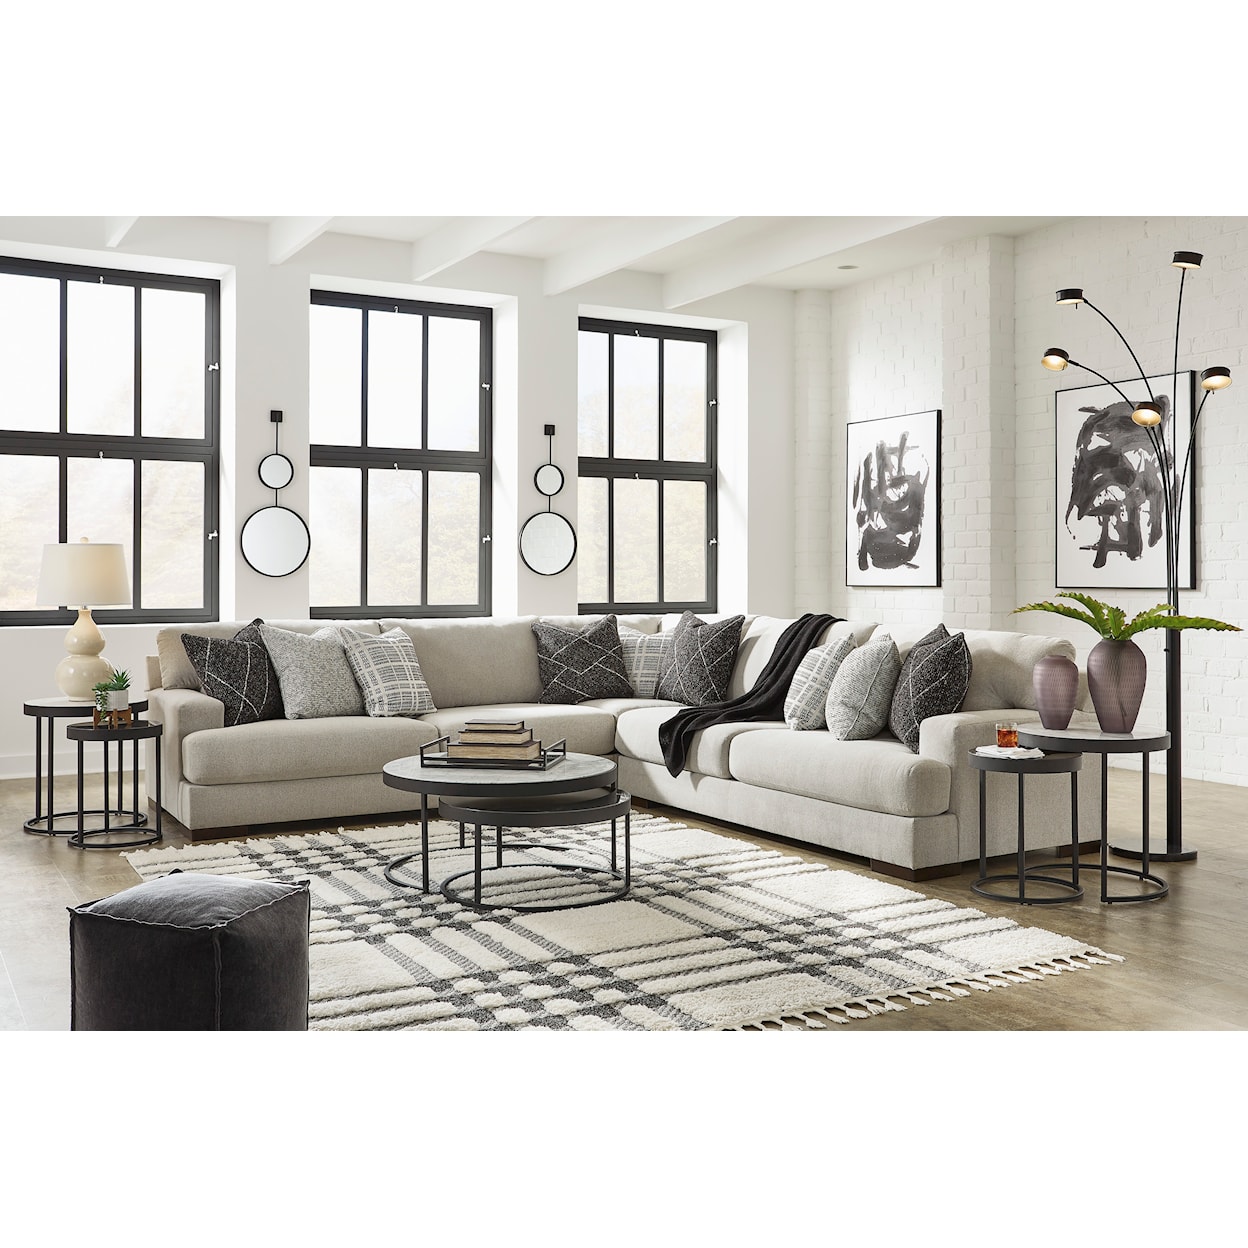 Benchcraft Alana 3-Piece Sectional